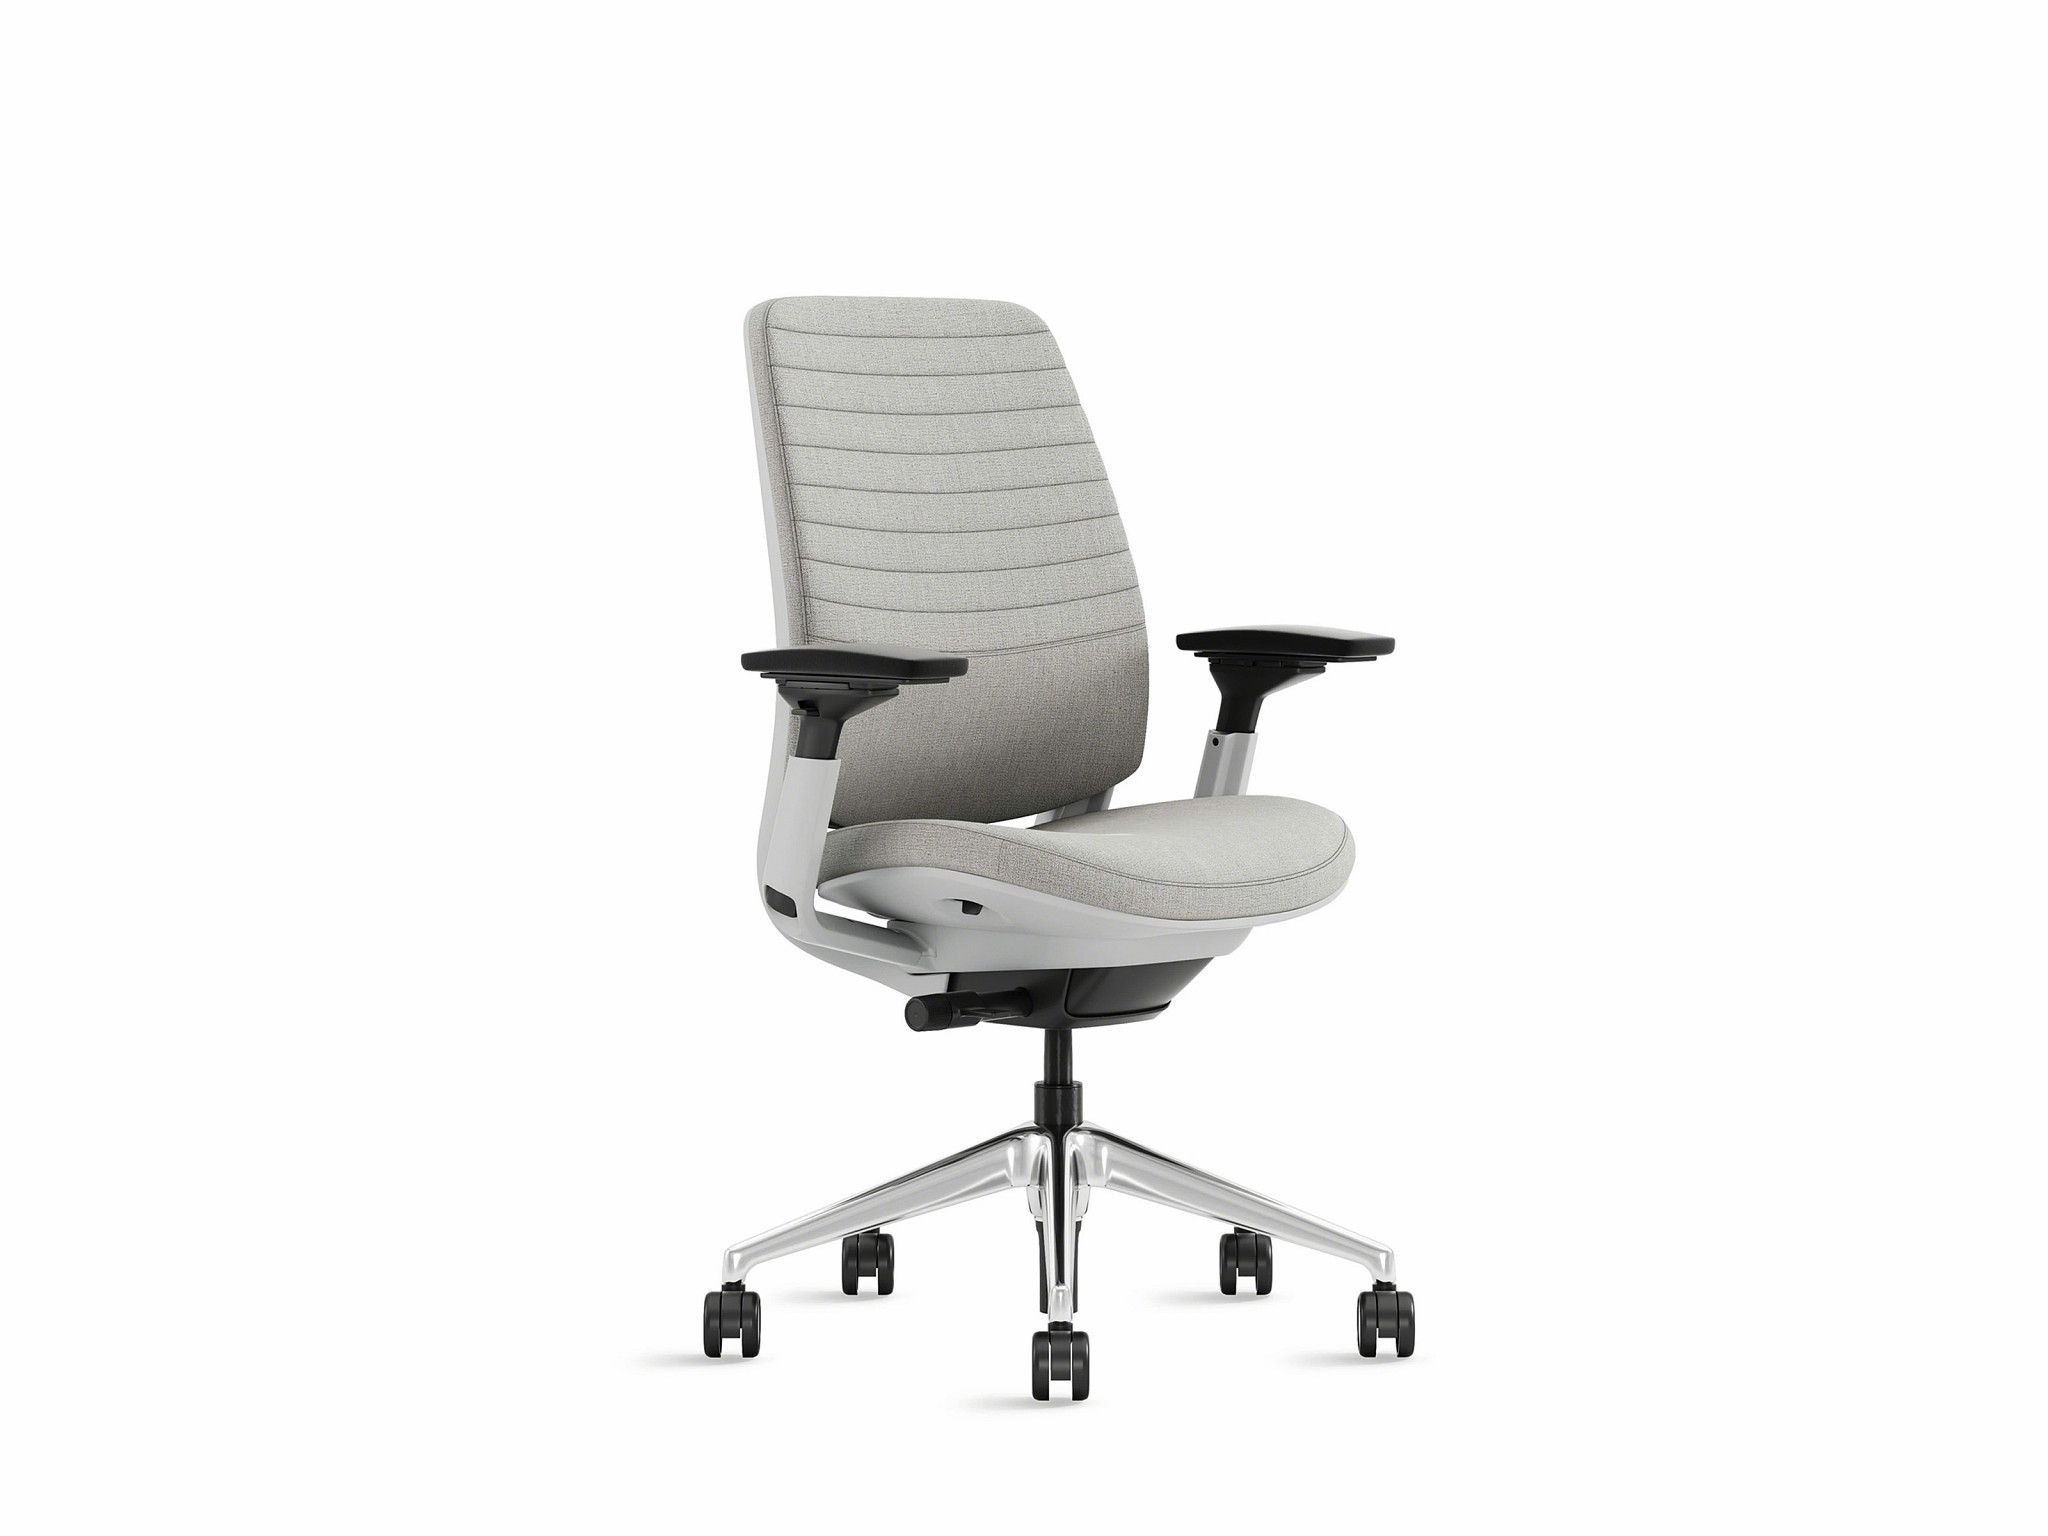 Steelcase Leap V2 Review 2021 Ergonomic And Fully Adjustable Office Chair